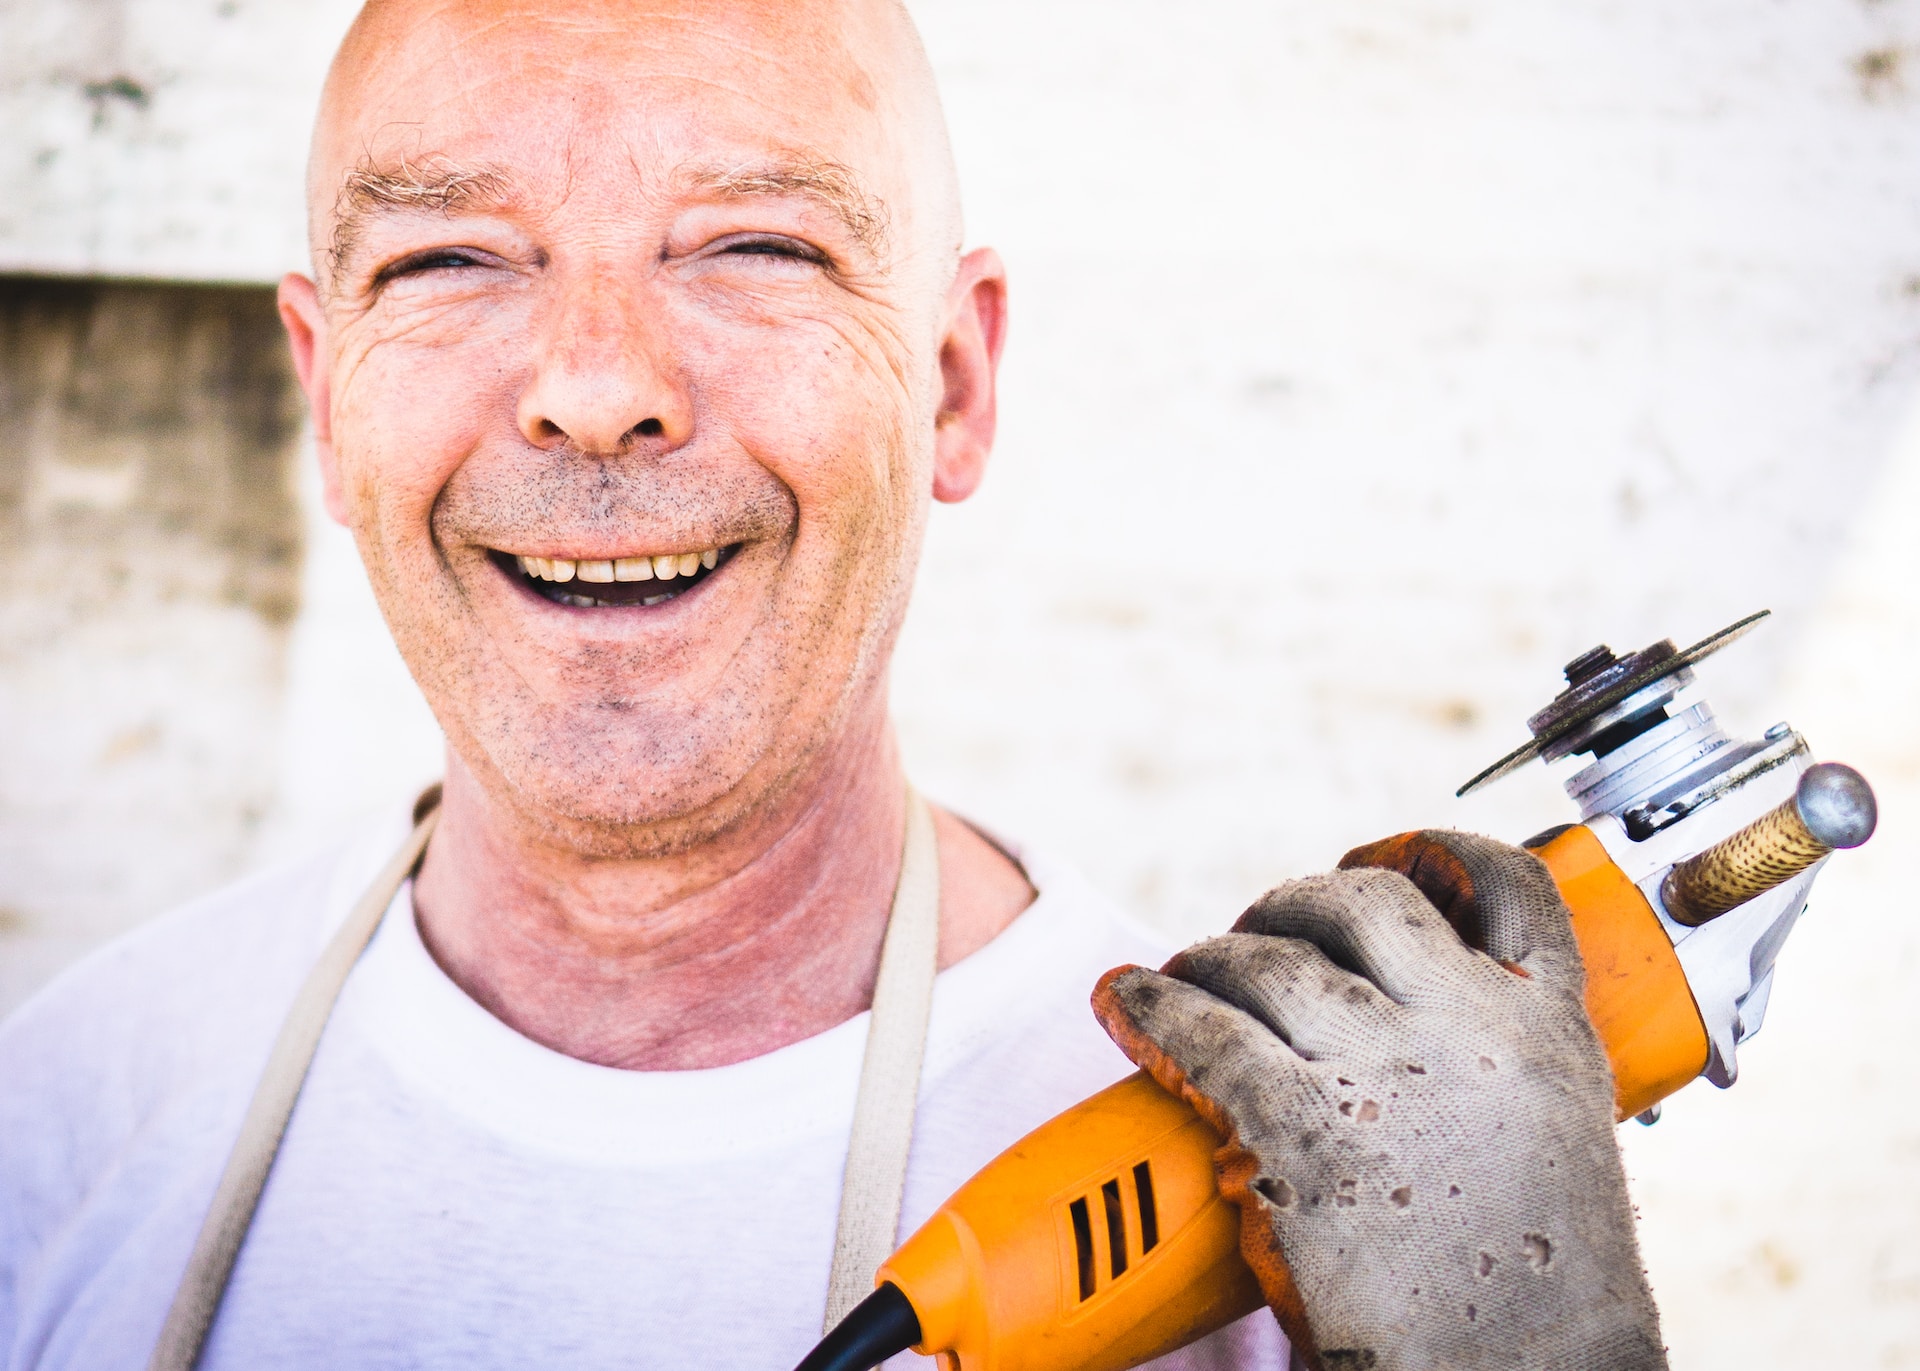 How digital marketing can be used for selling power tools